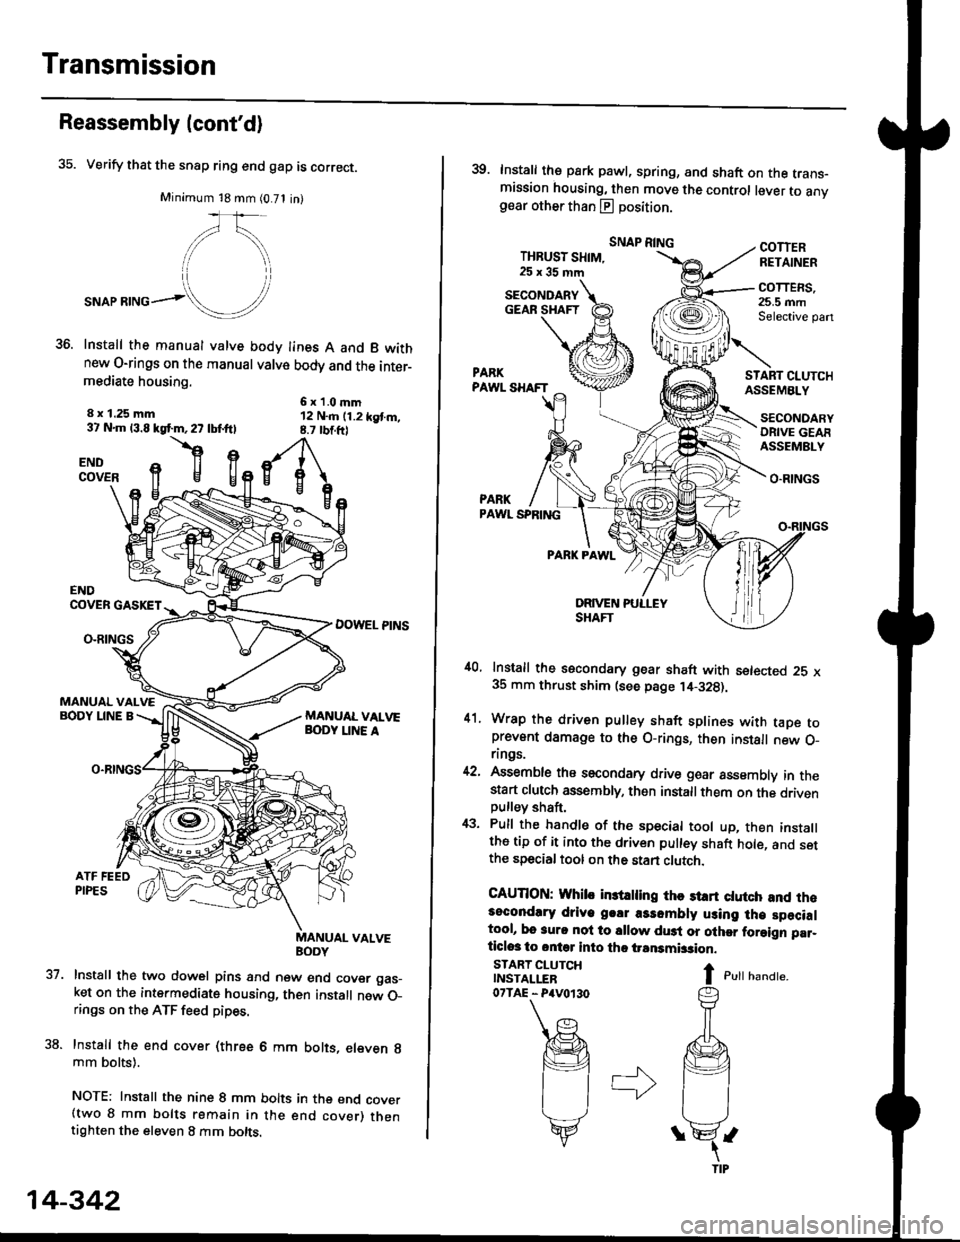 HONDA CIVIC 1996 6.G Workshop Manual Transmission
Reassembly (contd)
35. Verify that the snap ring end gap is correct.
Minimum 18 mm (0.71 in)
,/\,
."or**ol!/
Install the manual valve body lines A and B wkhnew O-rings on the manual val